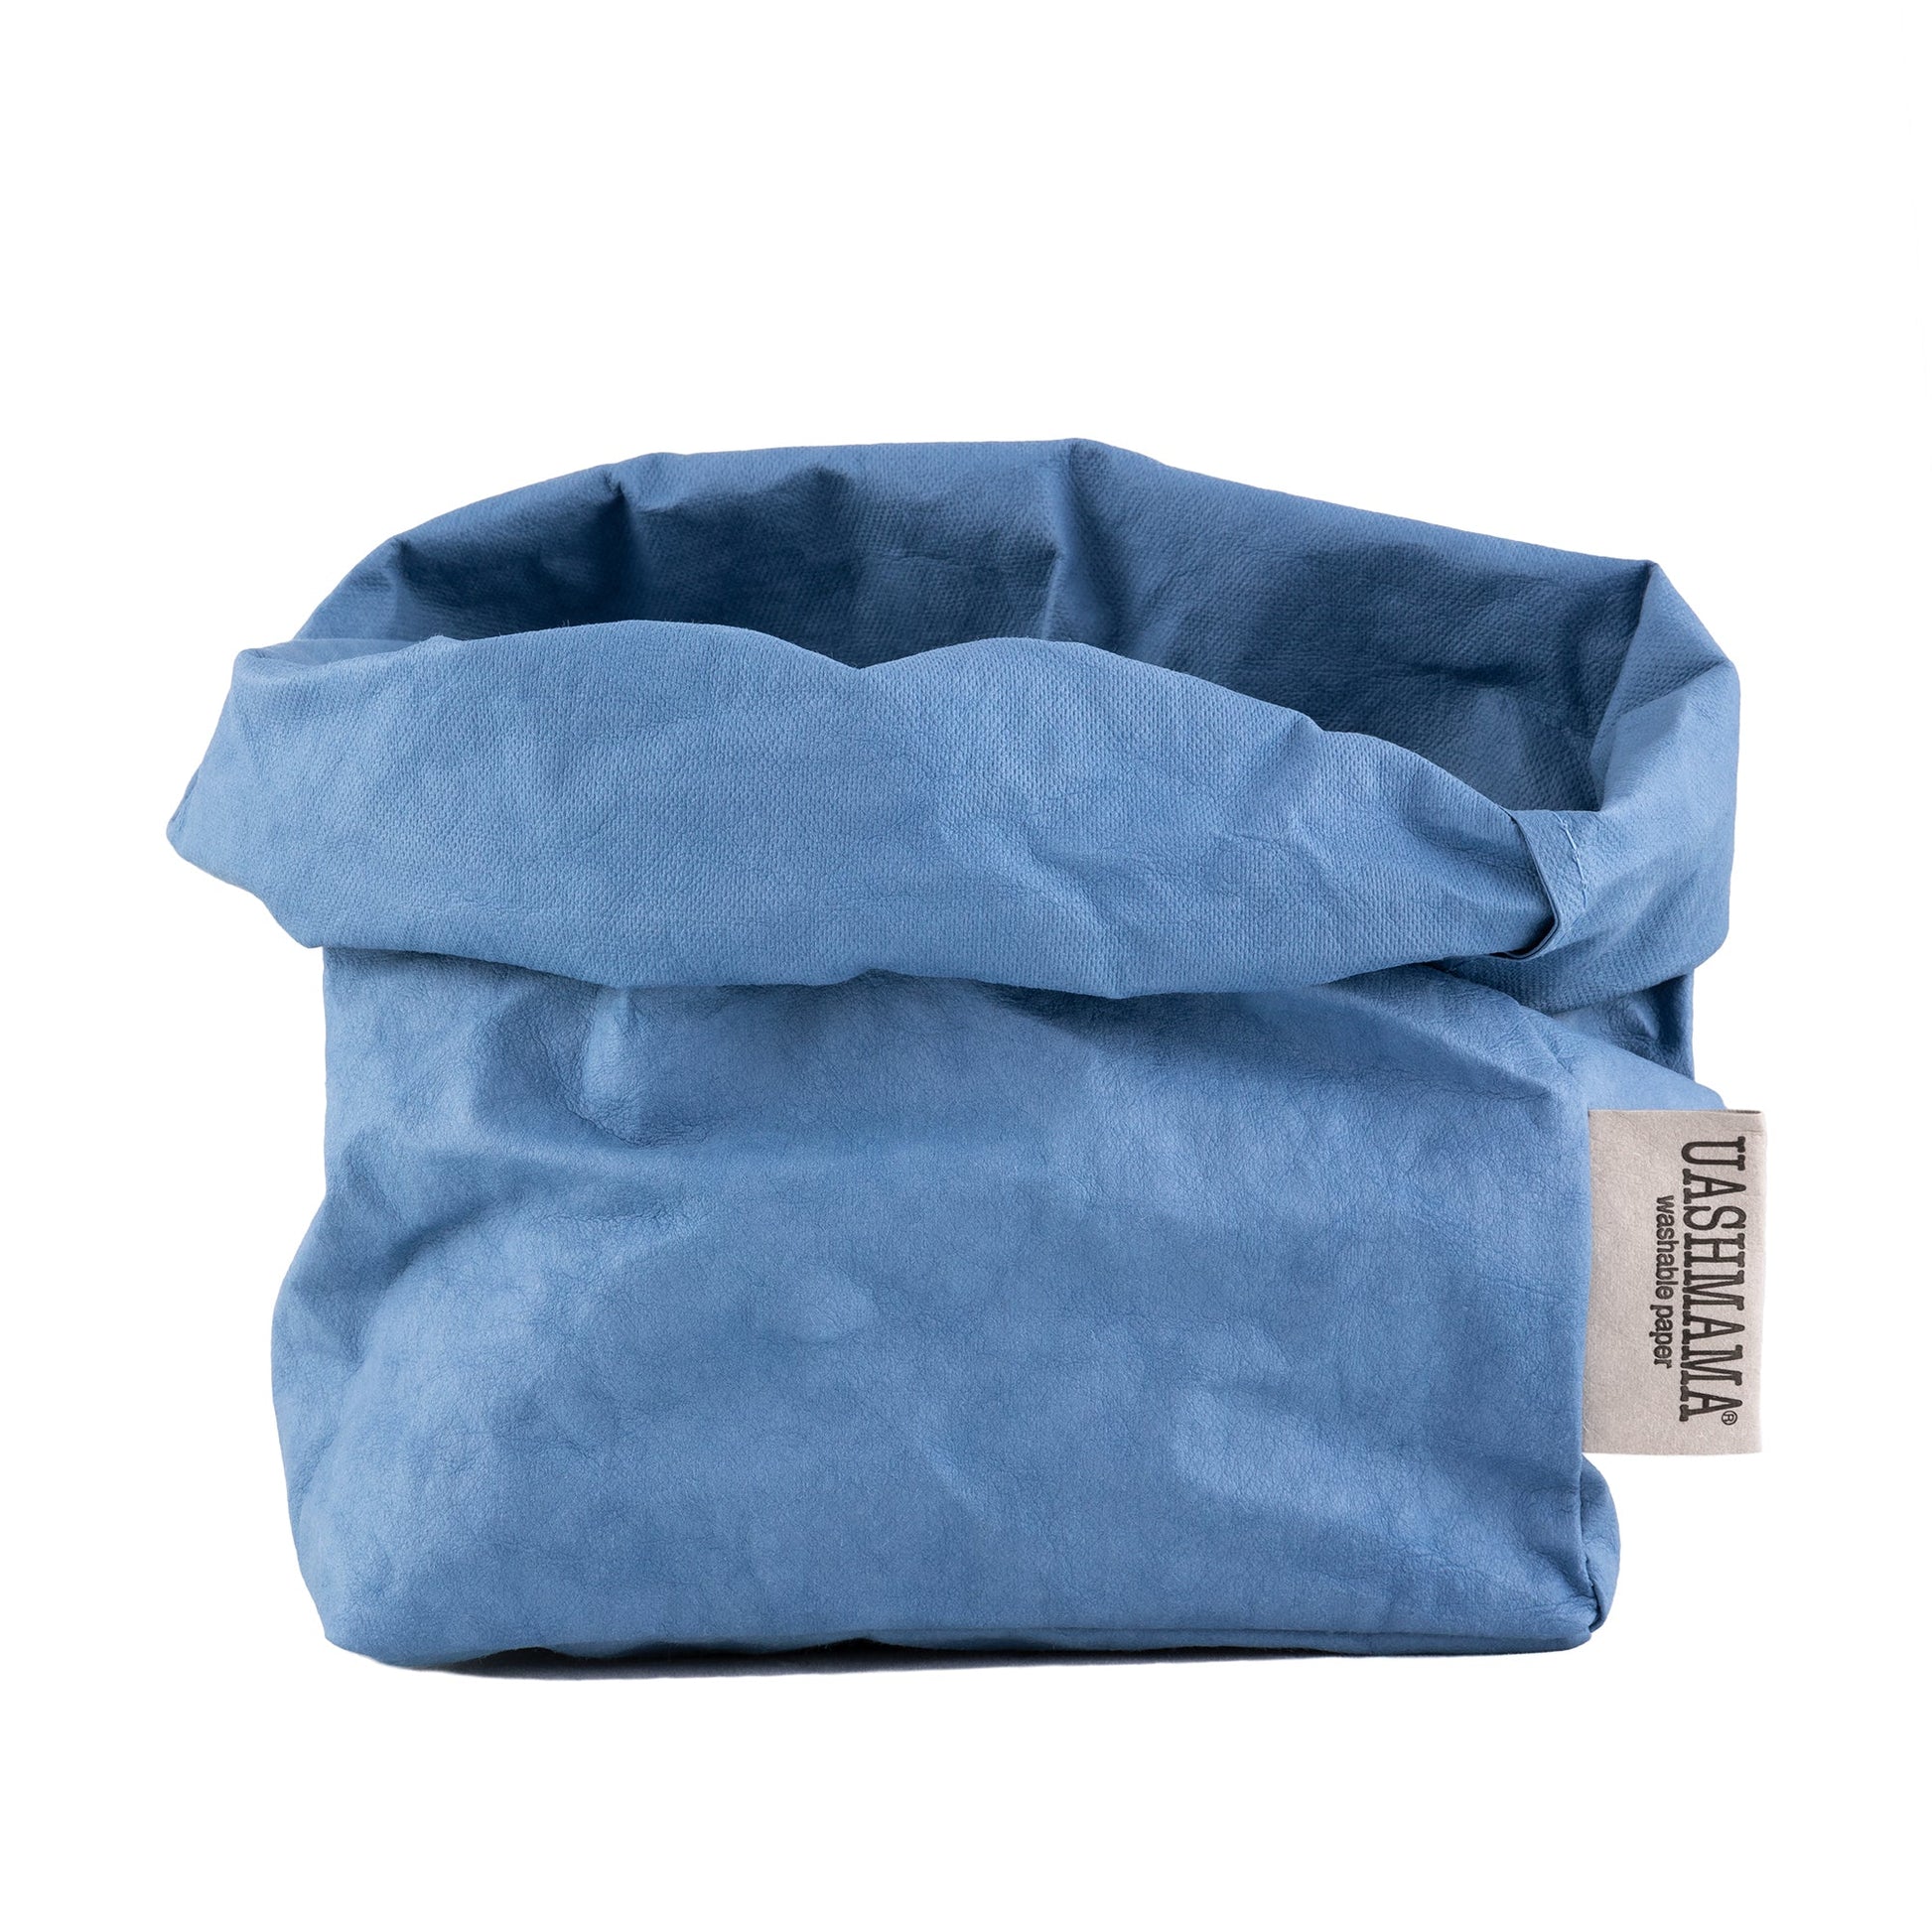 A washable paper bag is shown. The bag is rolled down at the top and features a UASHMAMA logo label on the bottom left corner. The bag pictured is the medium size in blue.